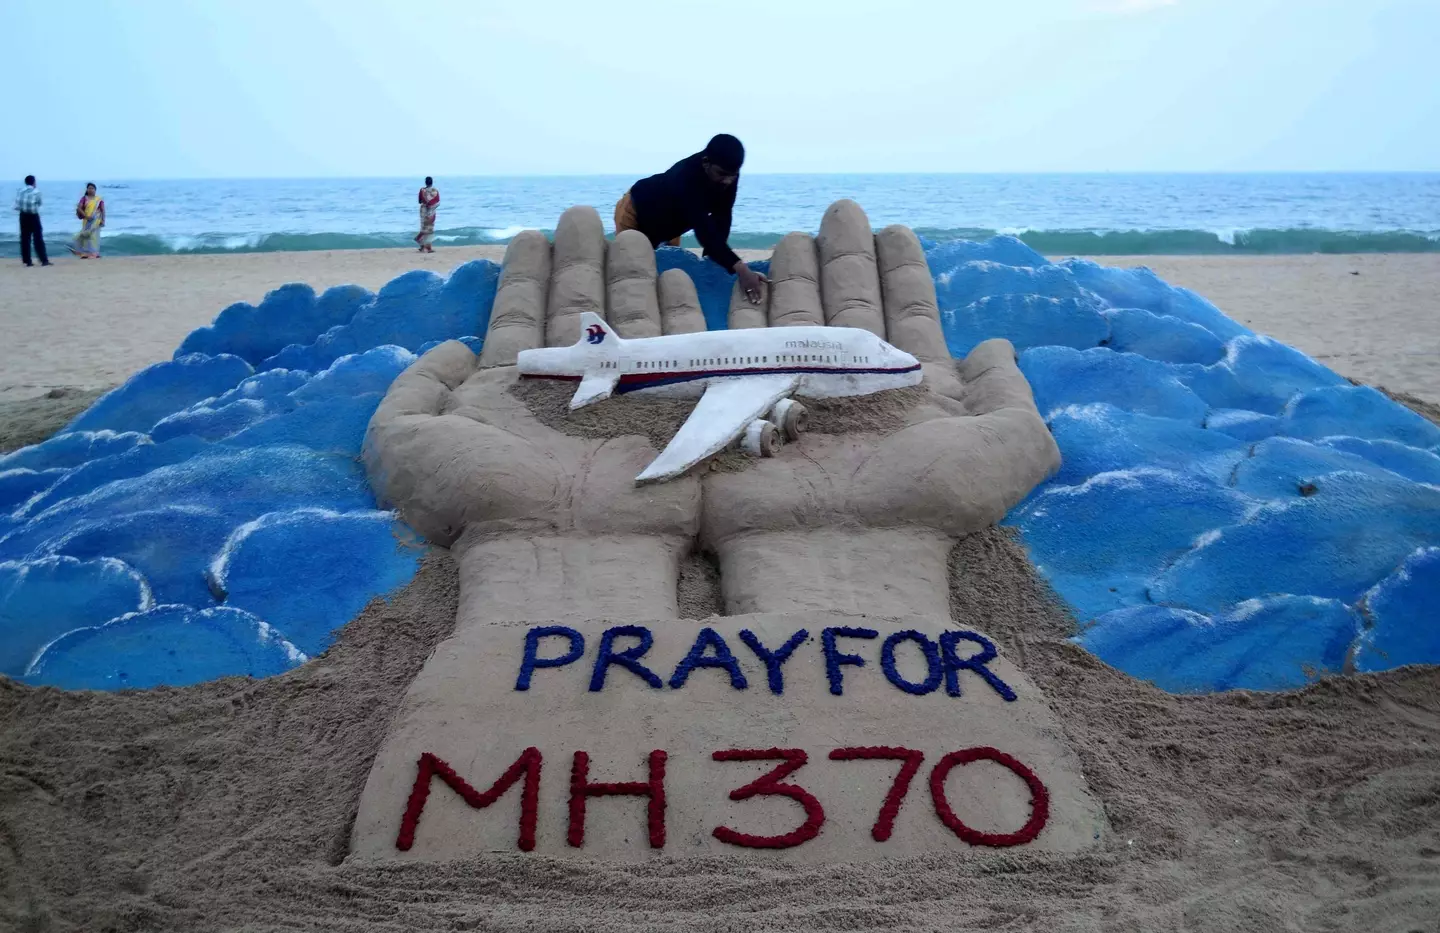 A tribute to flight MH370.